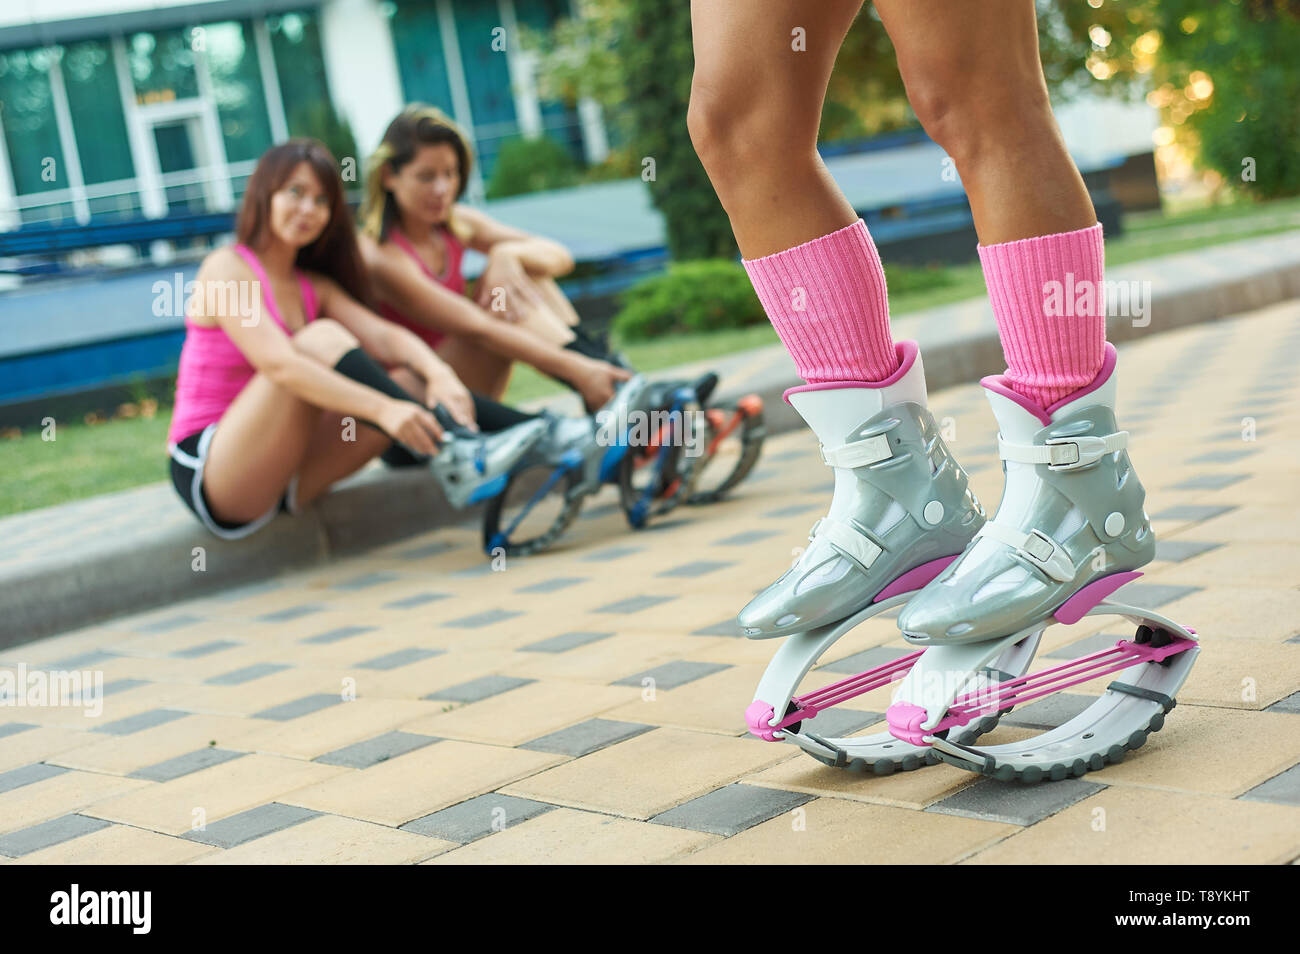 kangoo jumping fitness women team in boots. close up shot with blurred  background. sport training concept Stock Photo - Alamy